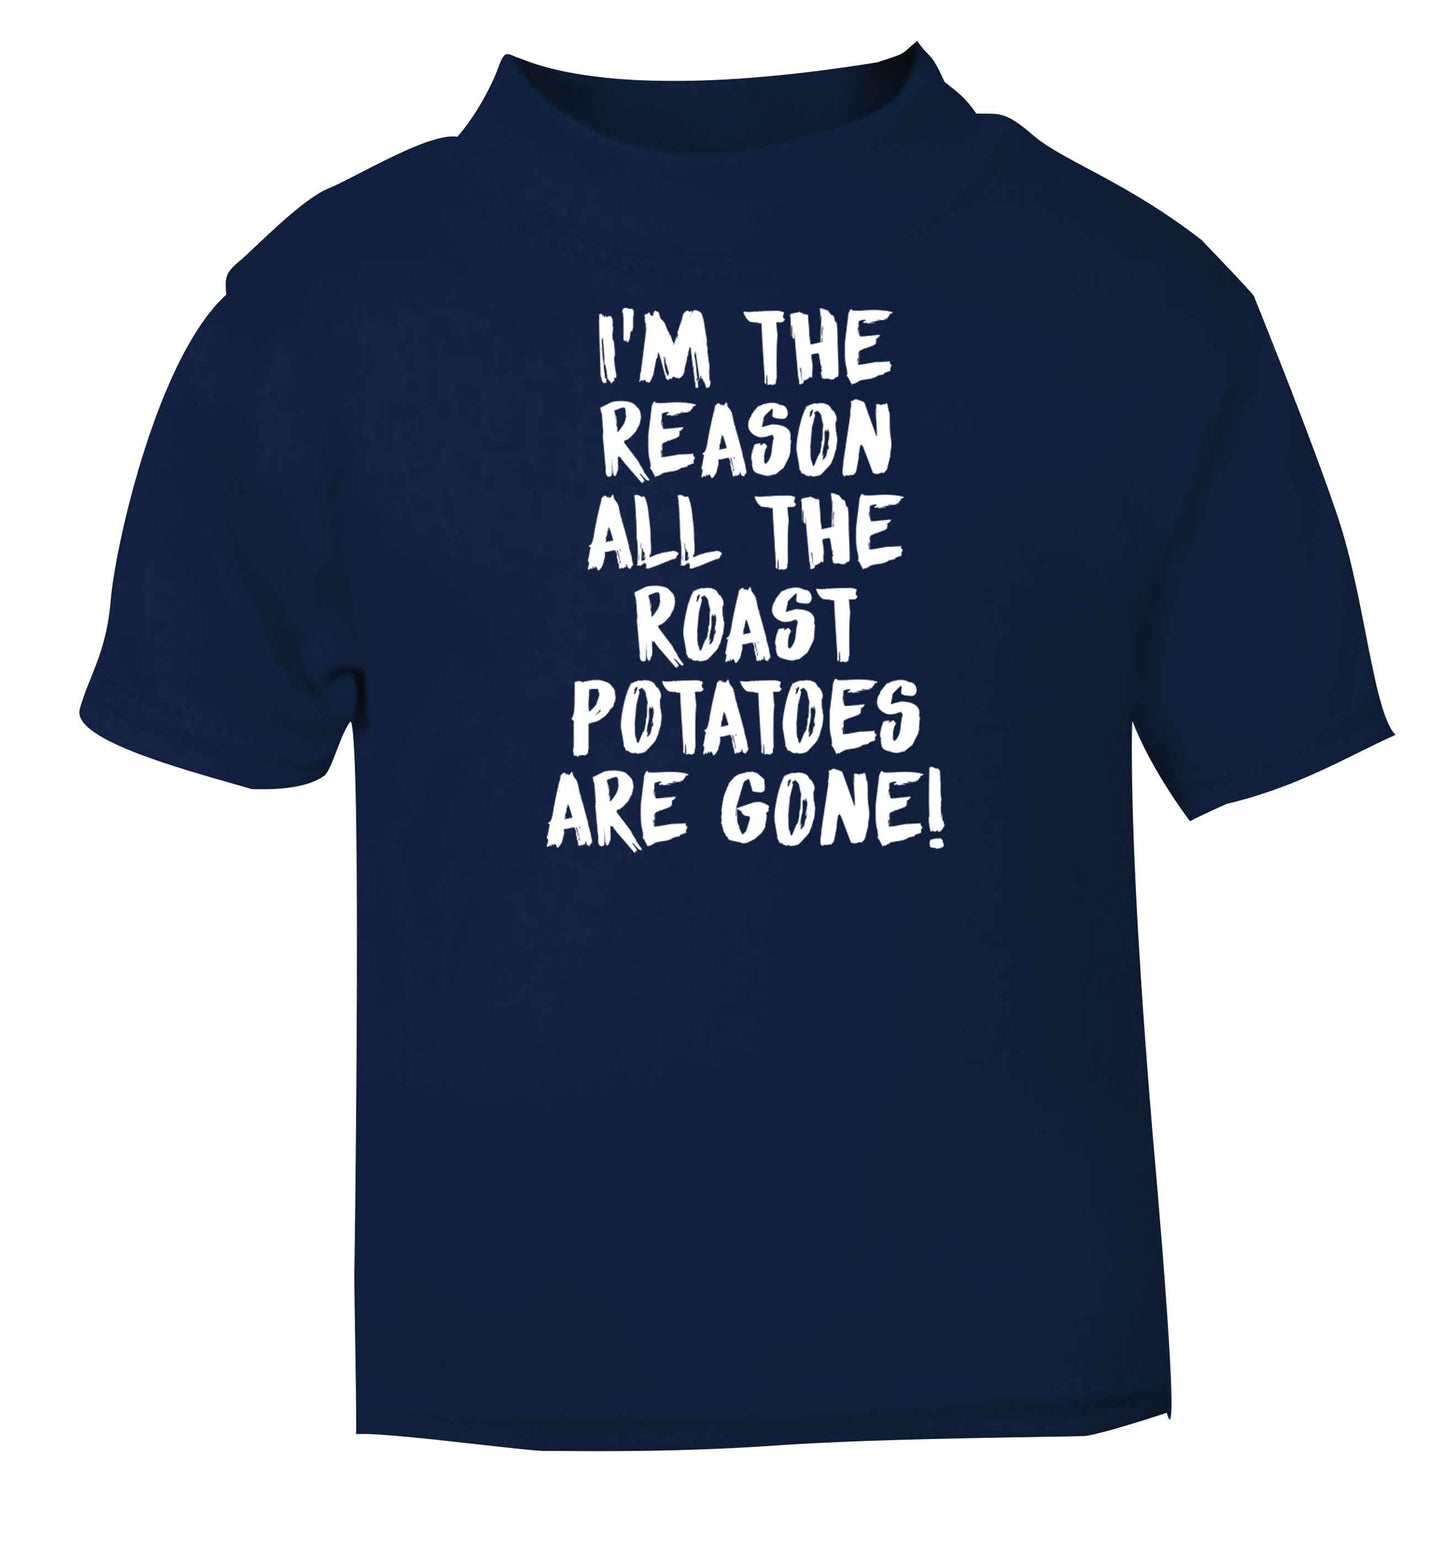 I'm the reason all the roast potatoes are gone navy baby toddler Tshirt 2 Years